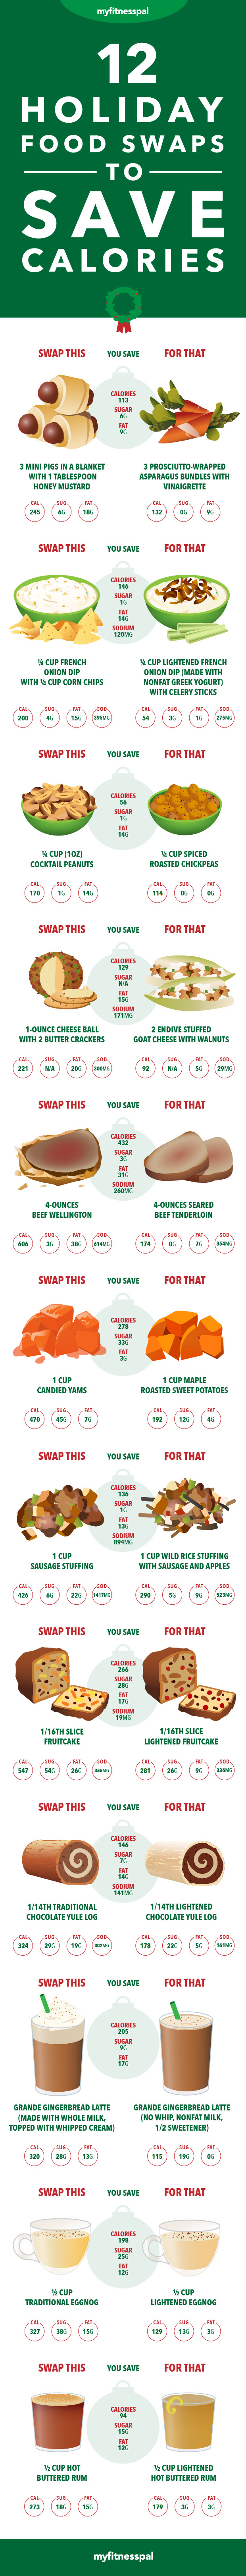 Healthy Holiday Swaps